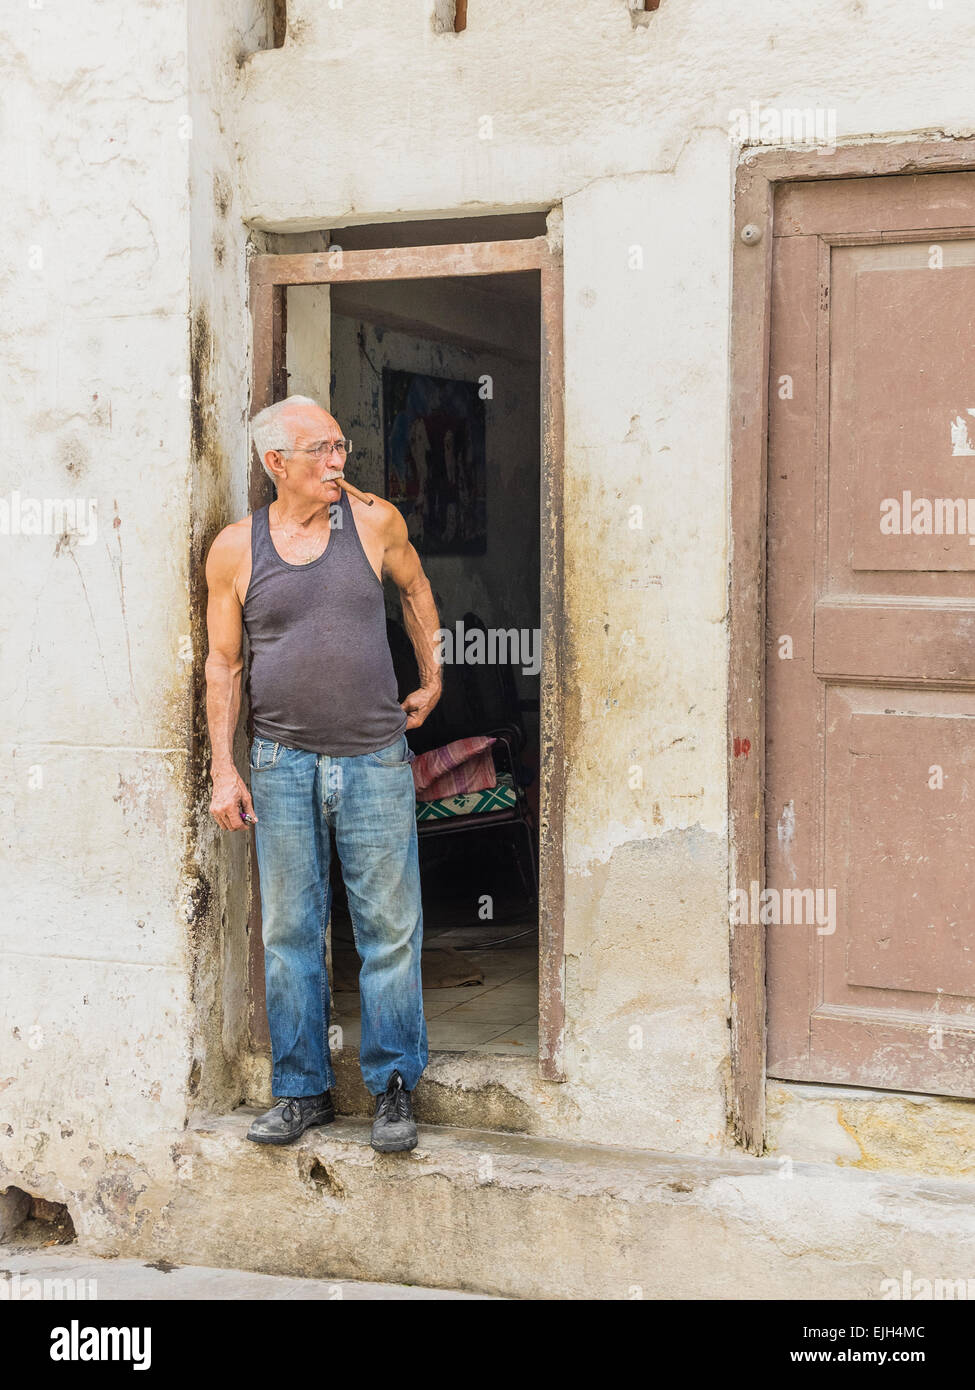 Hispanic Cuban senior citizen man with gray hair stands in the doorway of his home smoking a cigar. Stock Photo